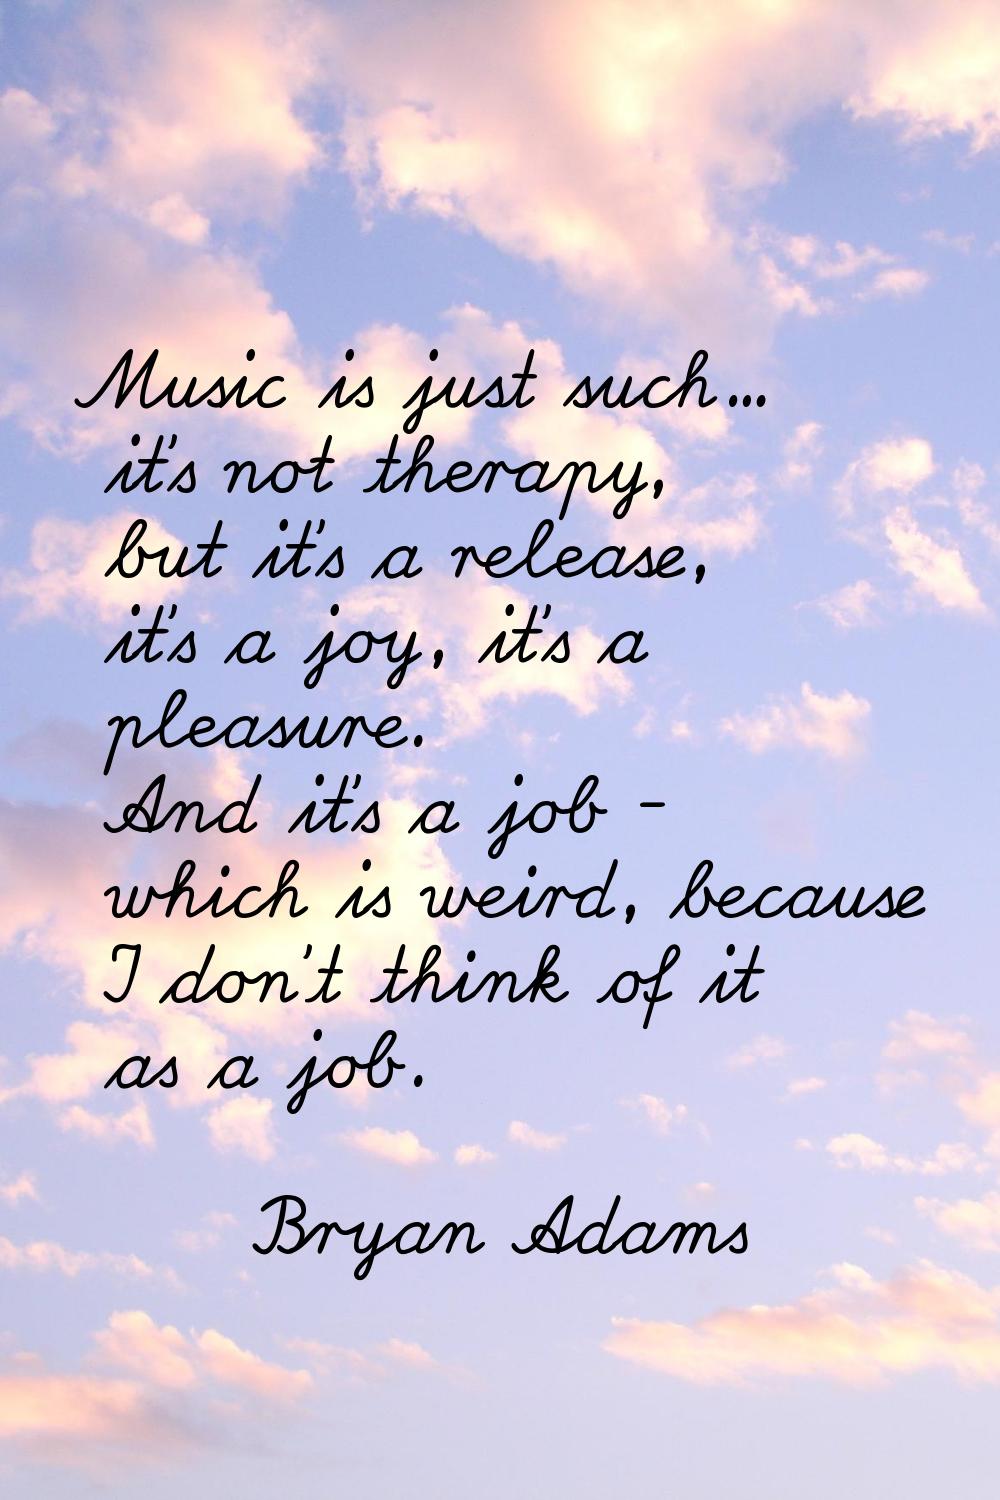 Music is just such... it's not therapy, but it's a release, it's a joy, it's a pleasure. And it's a